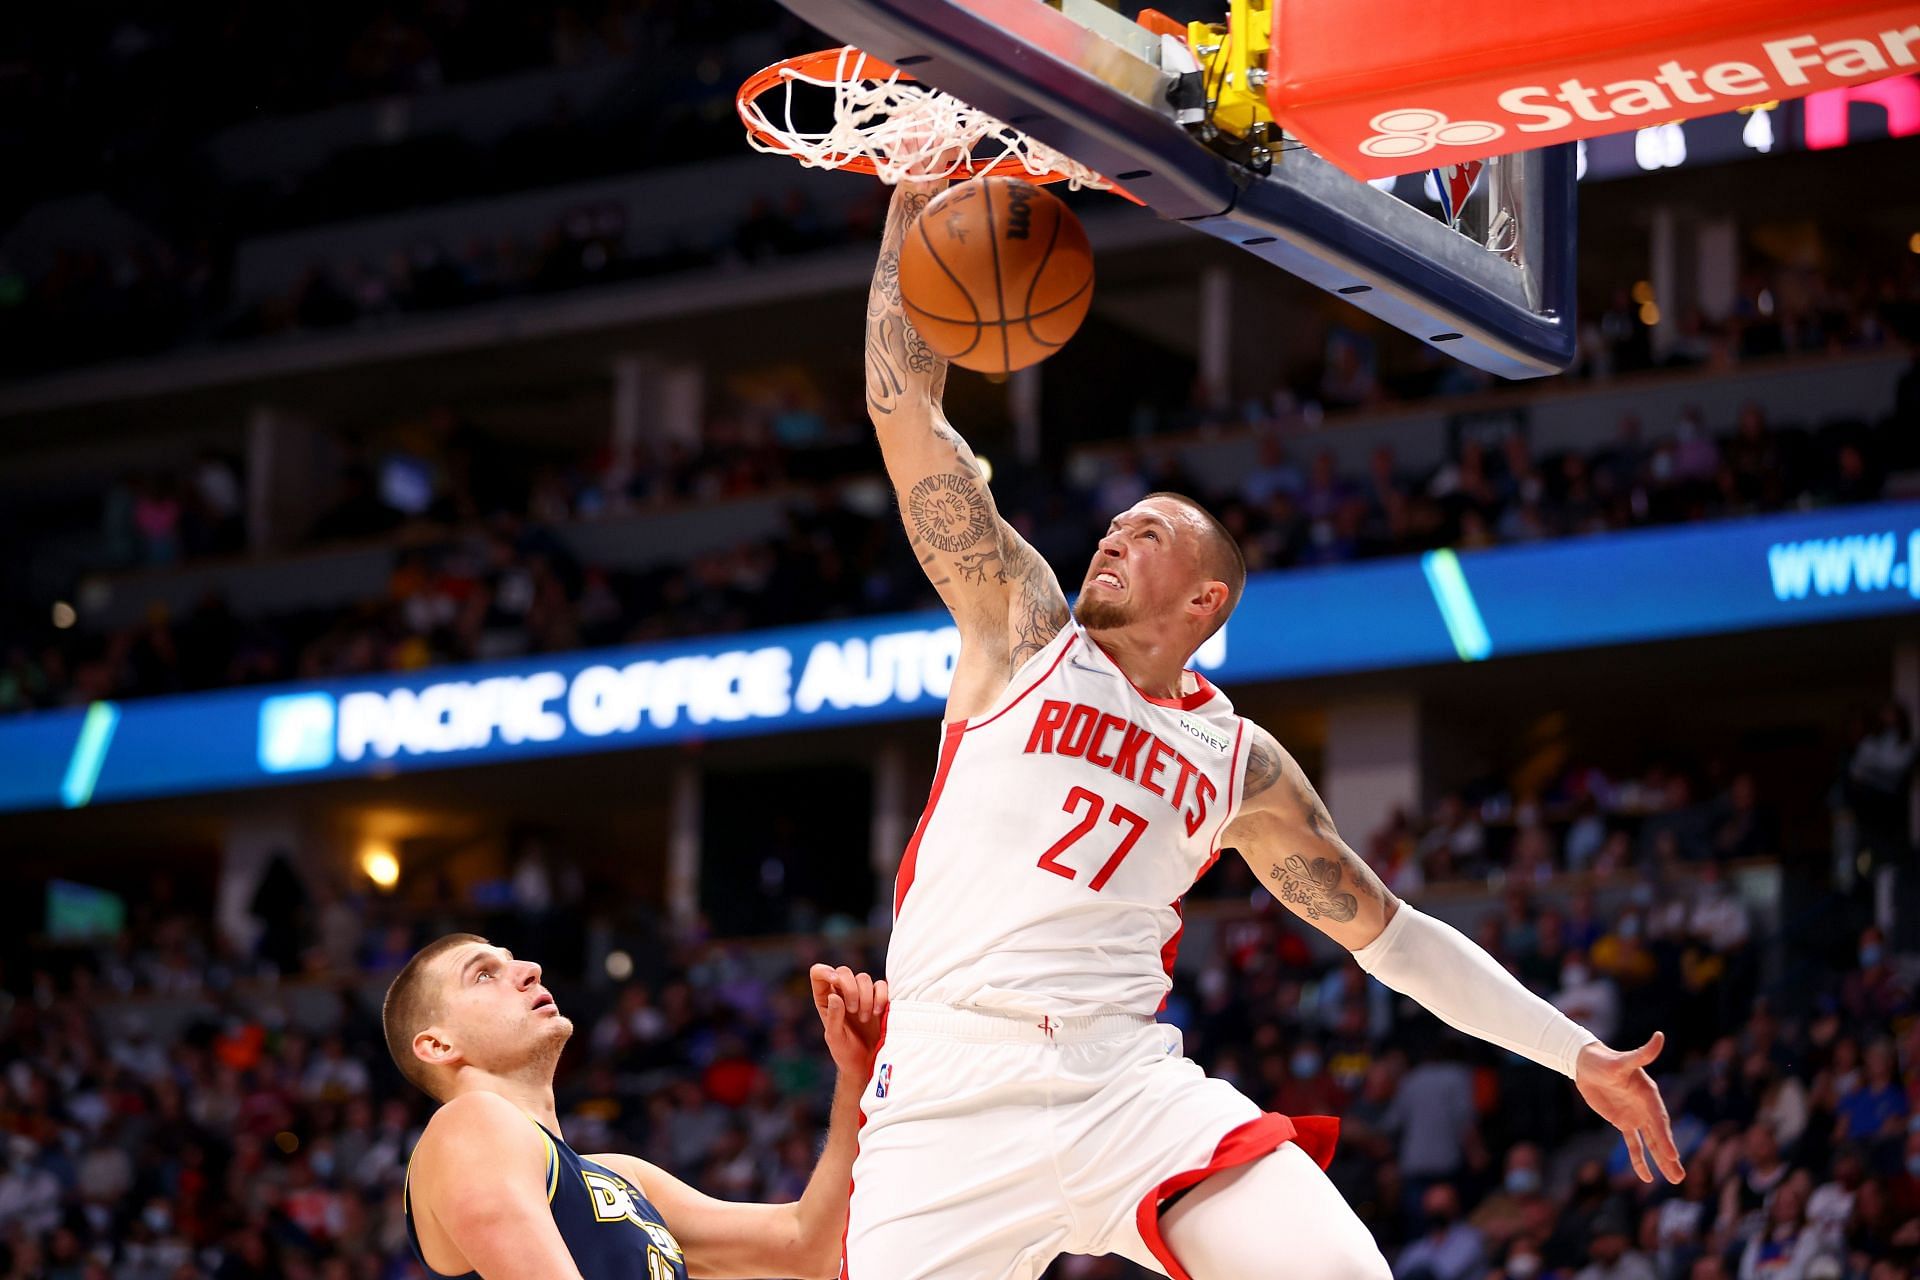 Daniel Theis dunks the ball in the Houston Rockets vs Denver Nuggets game.